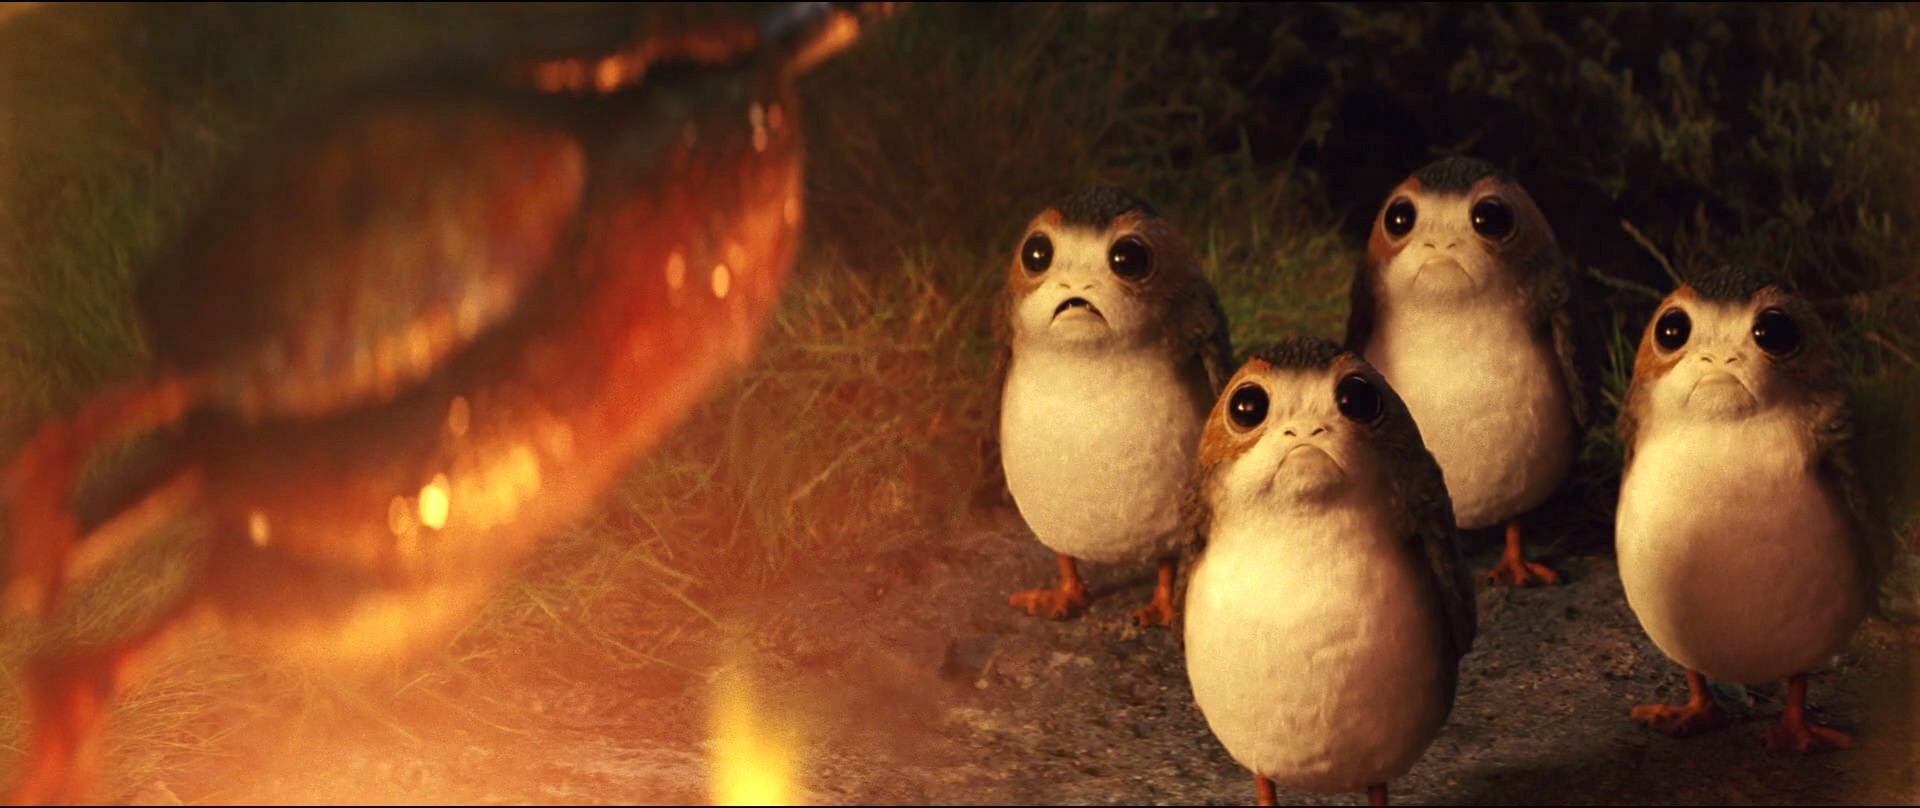 the last jedi - porgs and chewbacca eating a porg